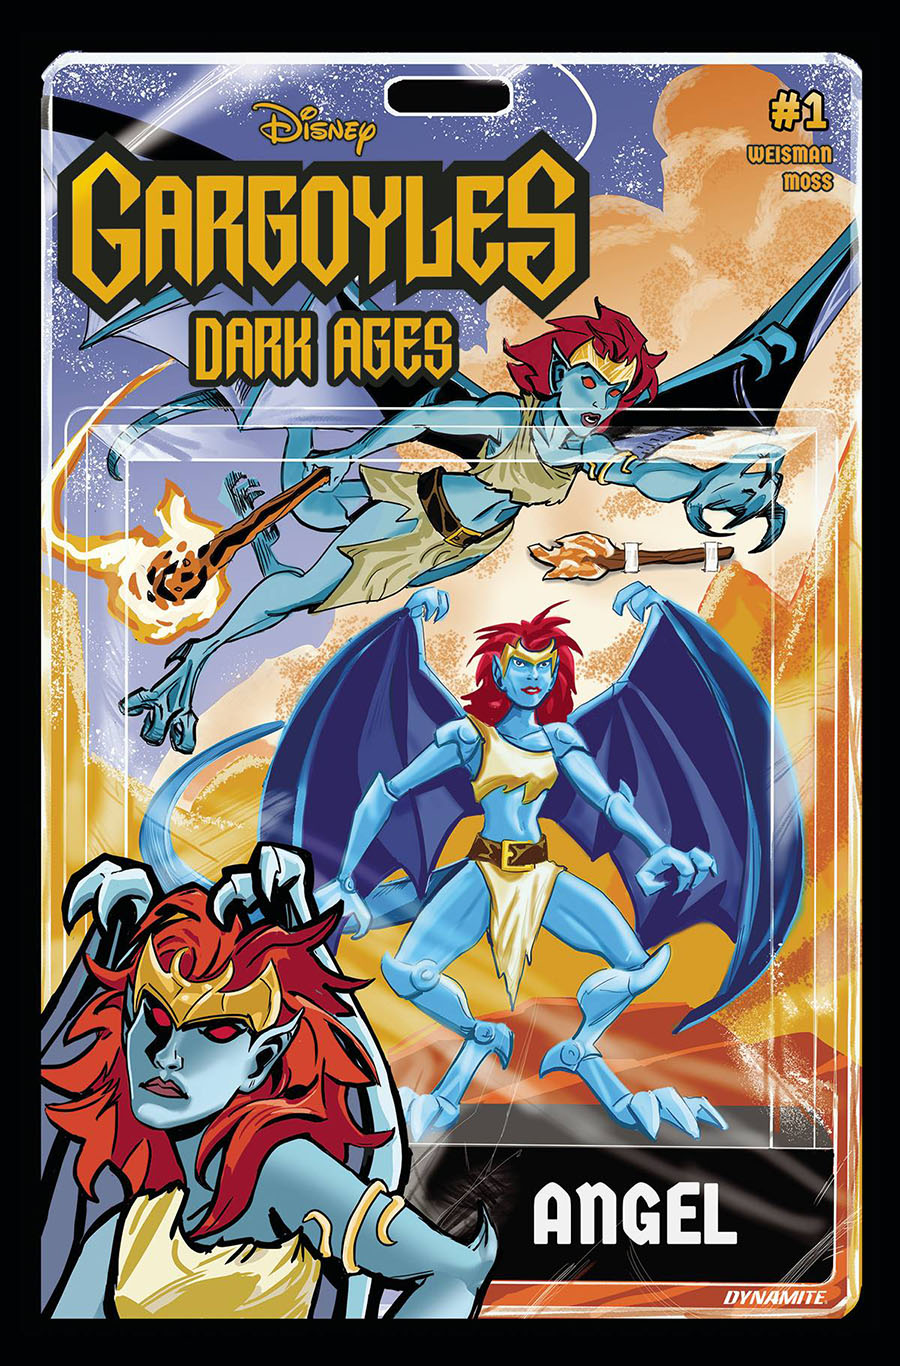 Gargoyles Dark Ages #1 Cover F Variant Action Figure Cover